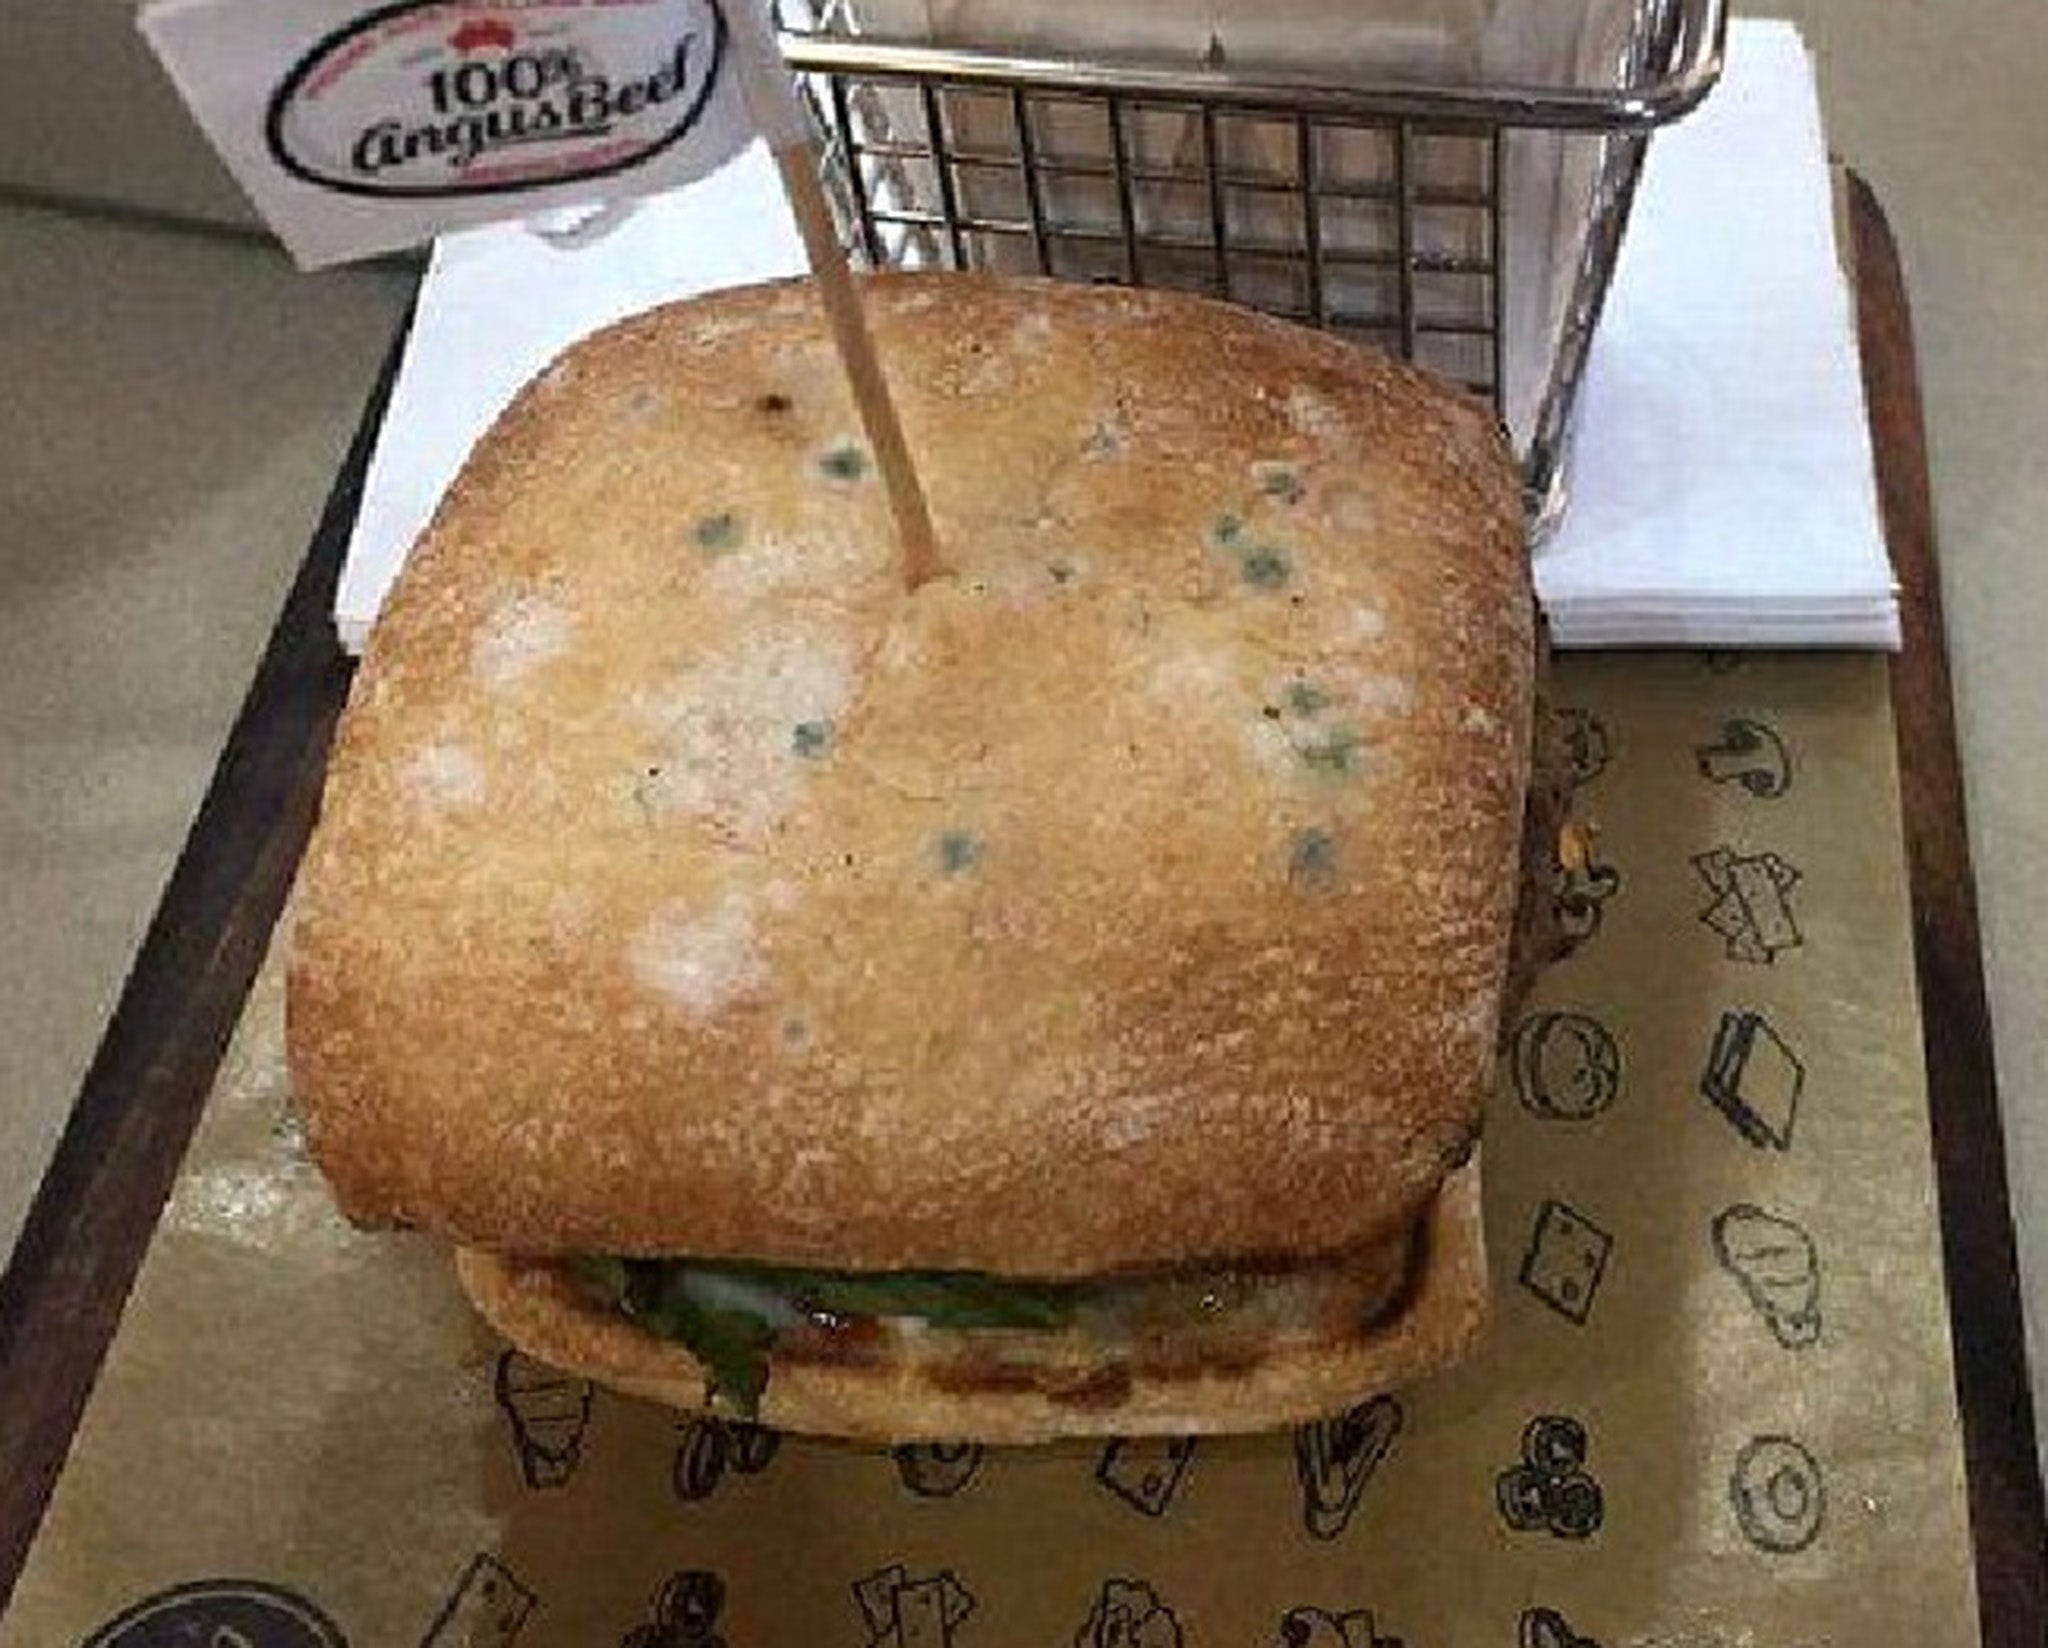 The 23-year-old posted an image of her mouldy burger on Facebook